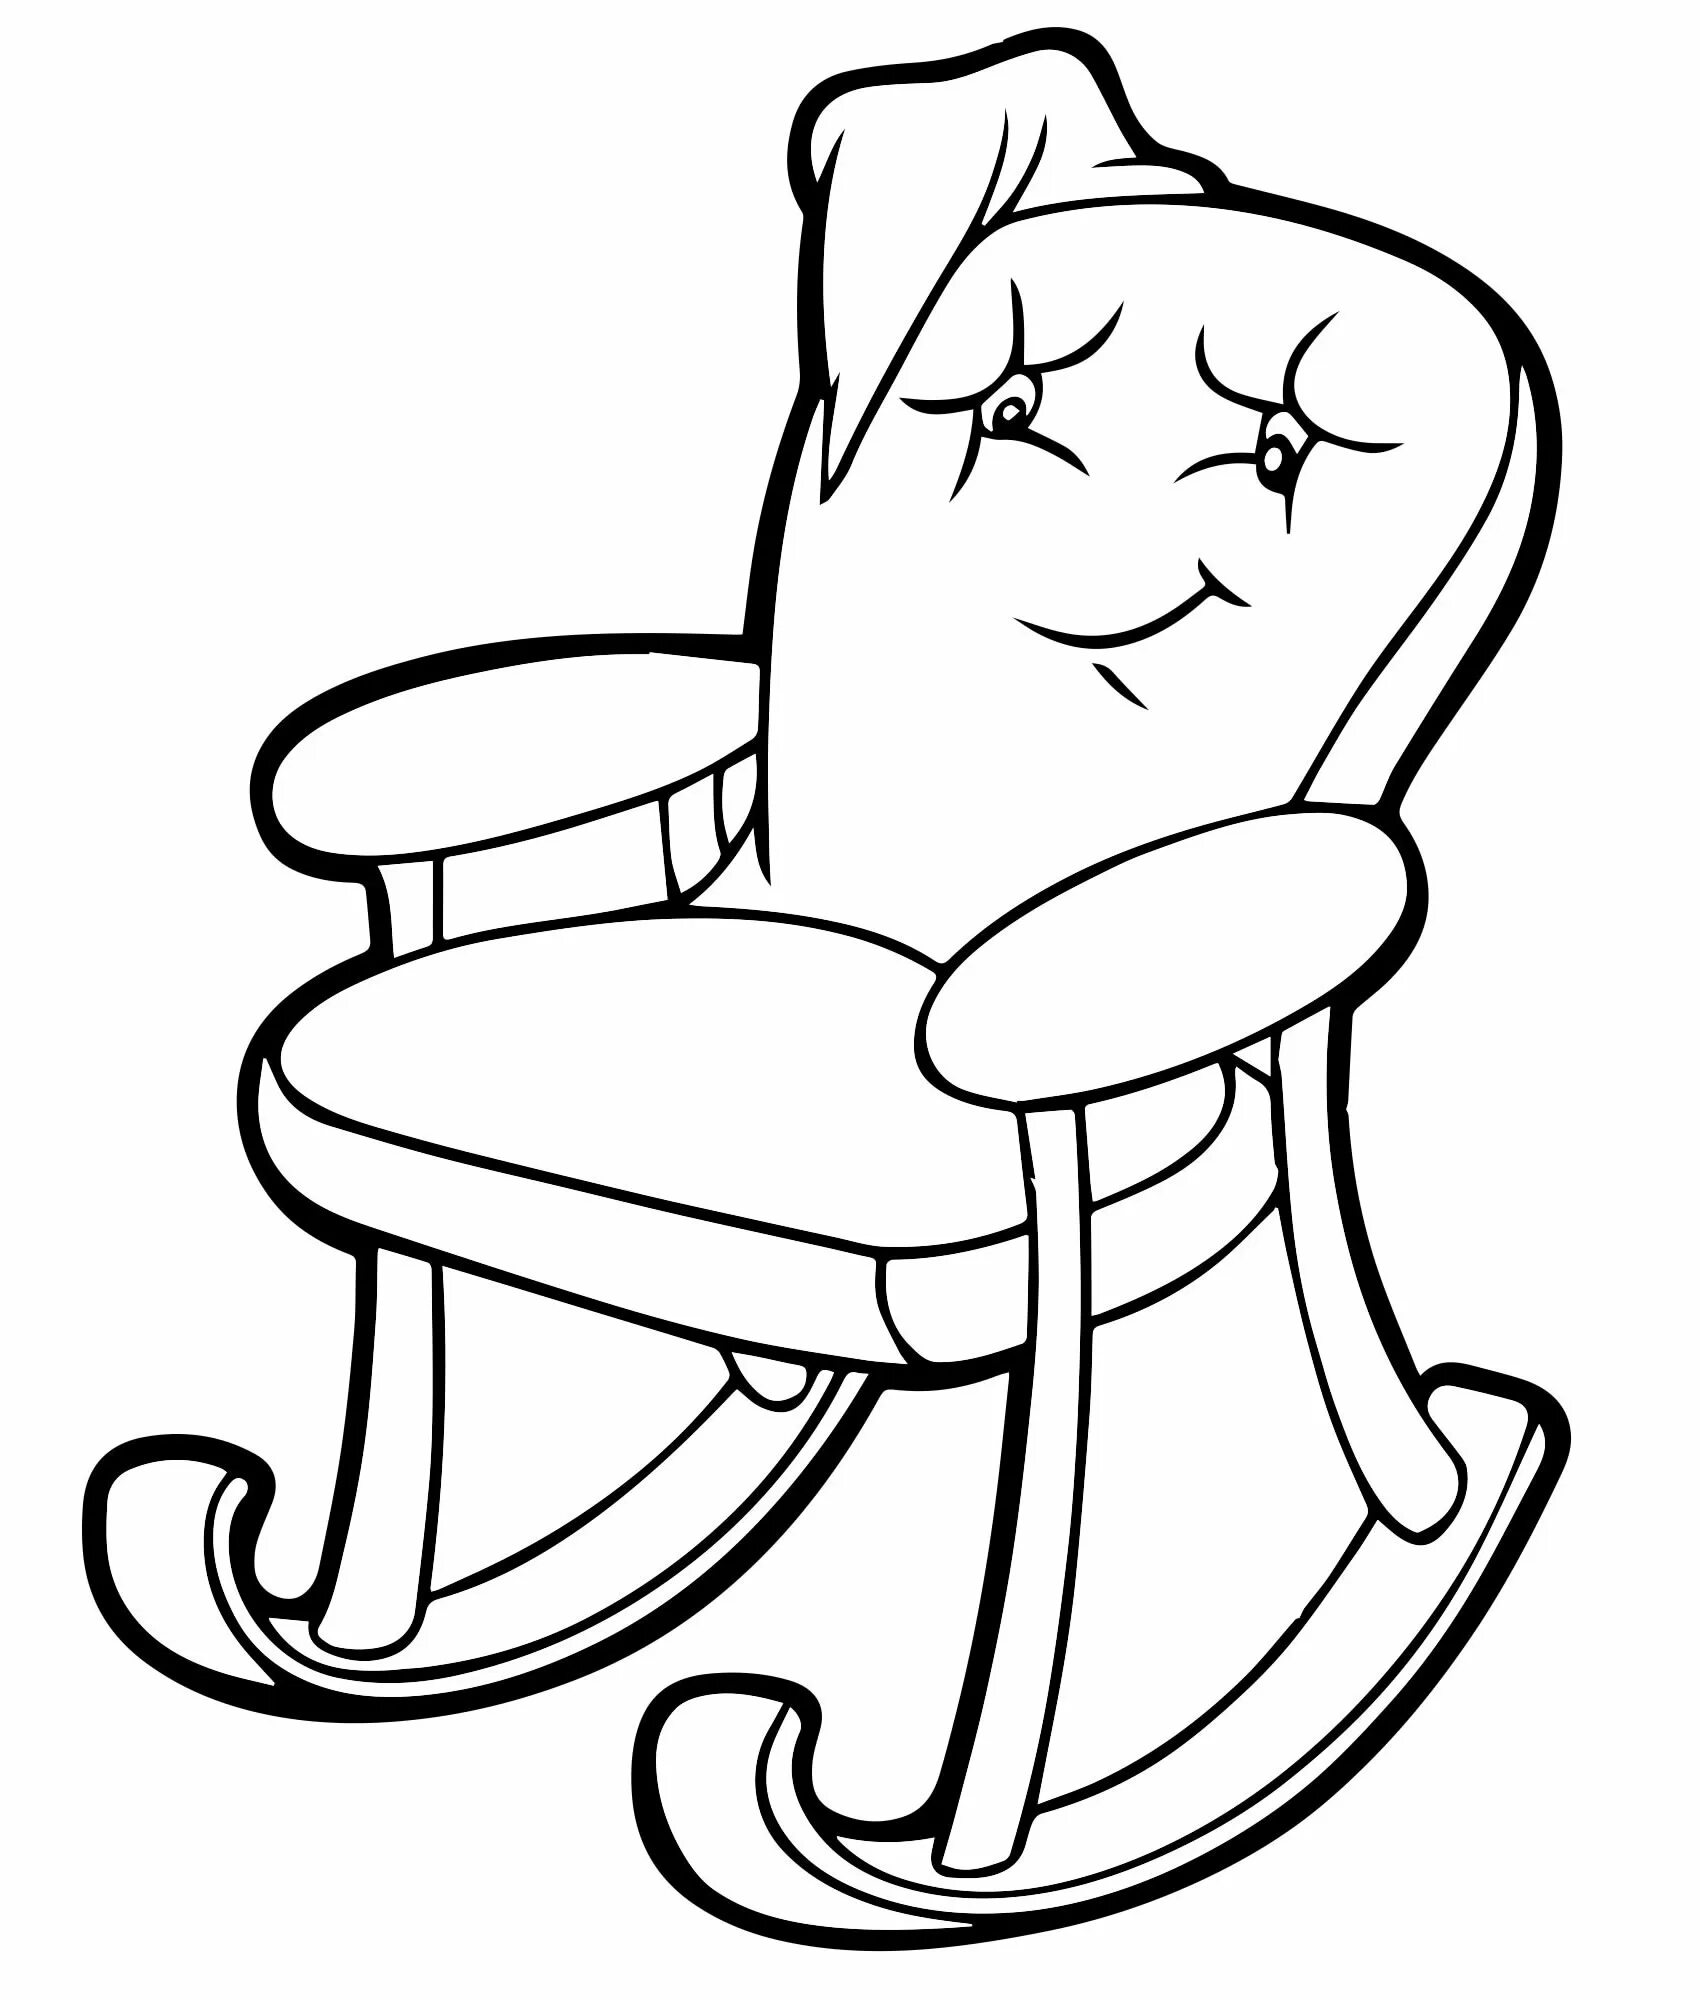 Animated coloring page of armchair for 4-5 year olds